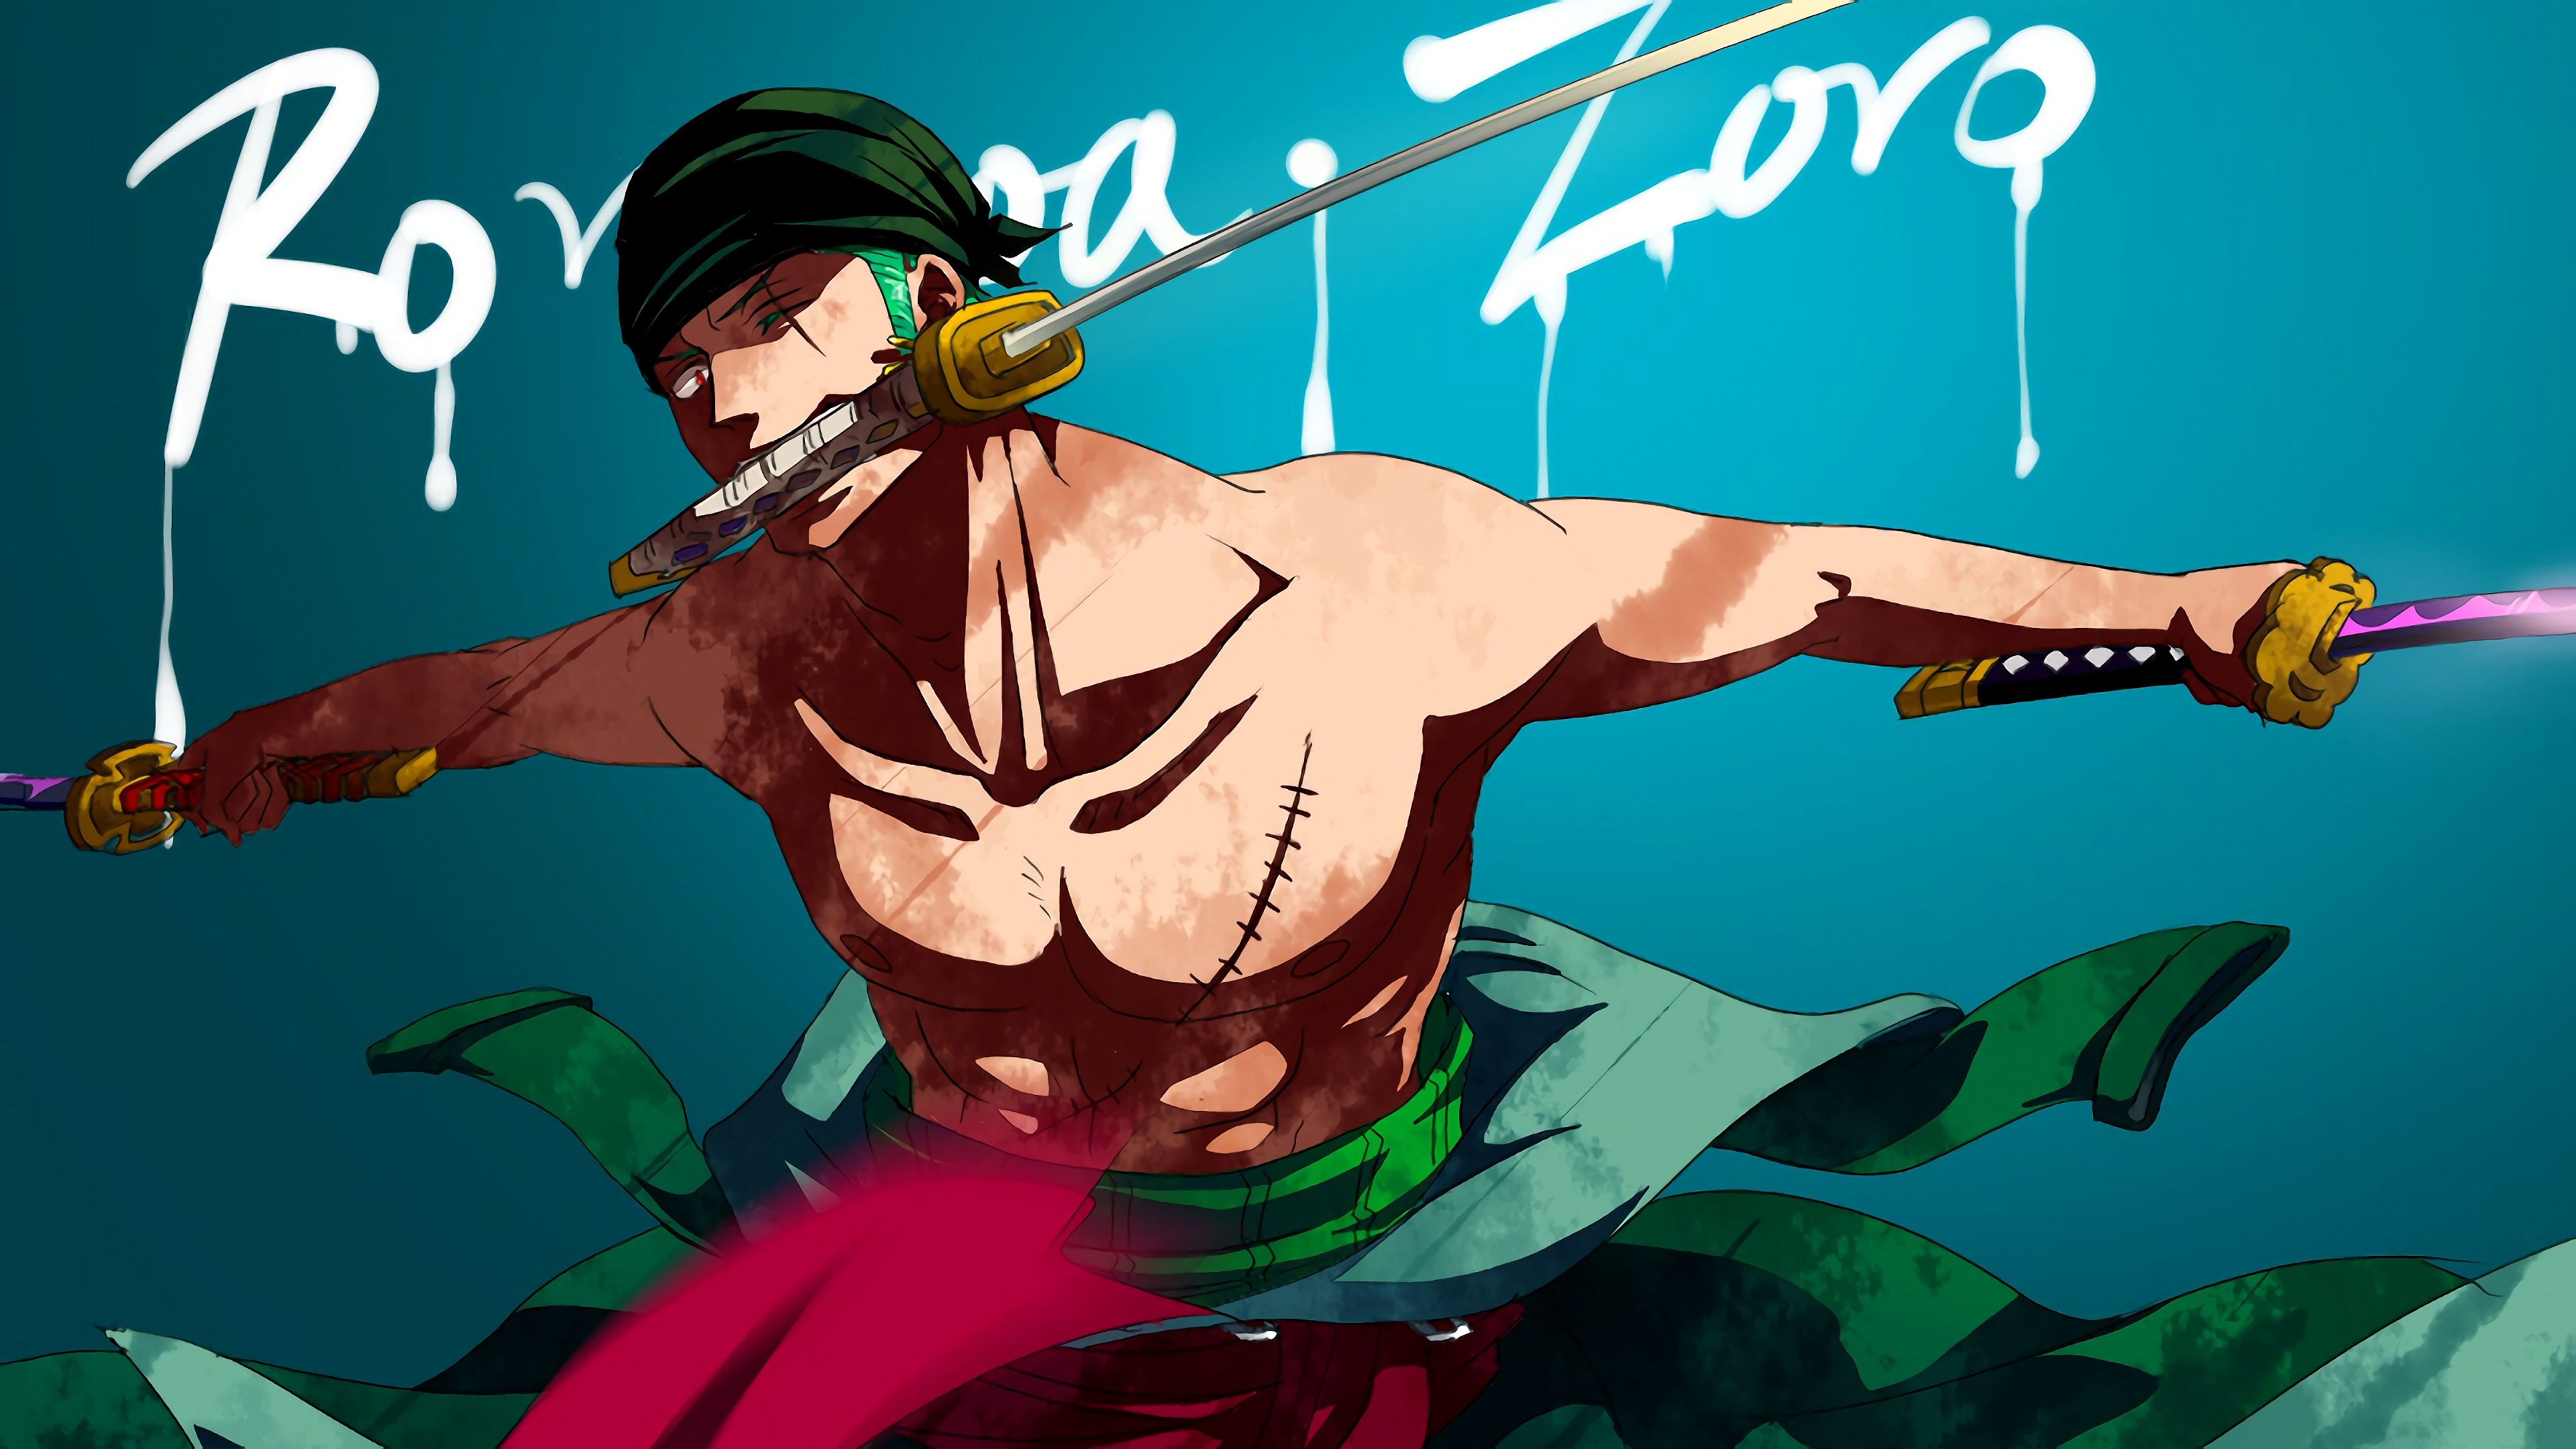 Desktop Wallpaper Roronoa Zoro Of One Piece Anime Wallpaper, Hd Image,  Picture, Background, Og2s8i